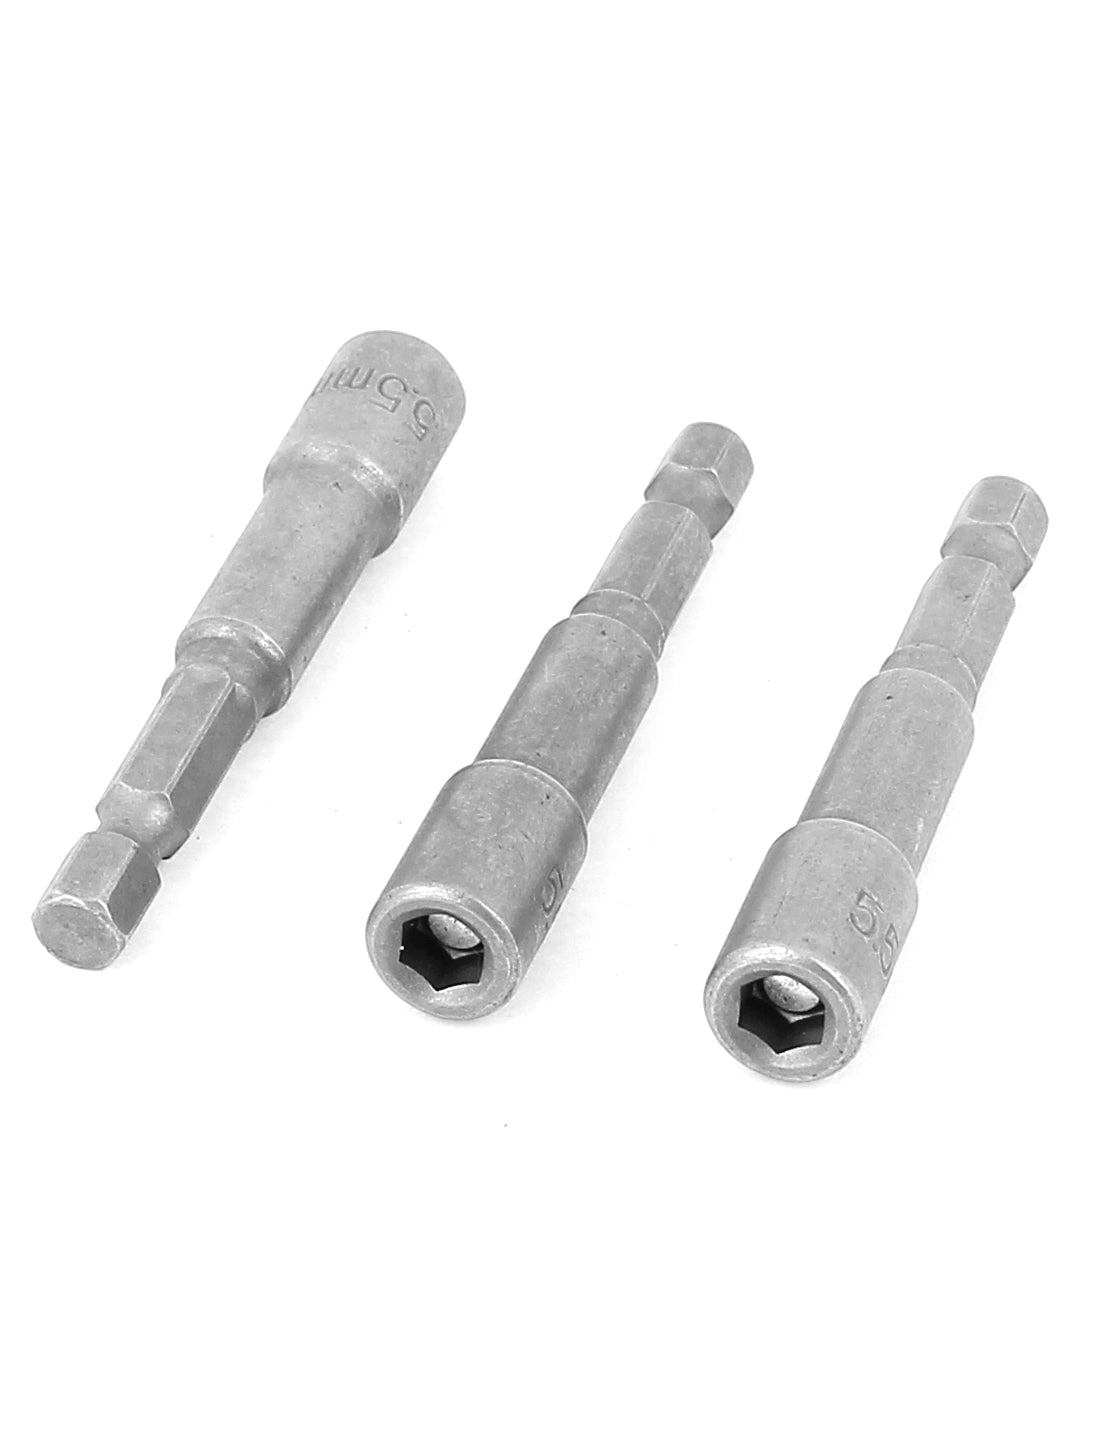 uxcell Uxcell 3 Pcs 65mm Length 5.5mm Hex Socket Driver Bit Metal Shank Magnetic Nuts Setter